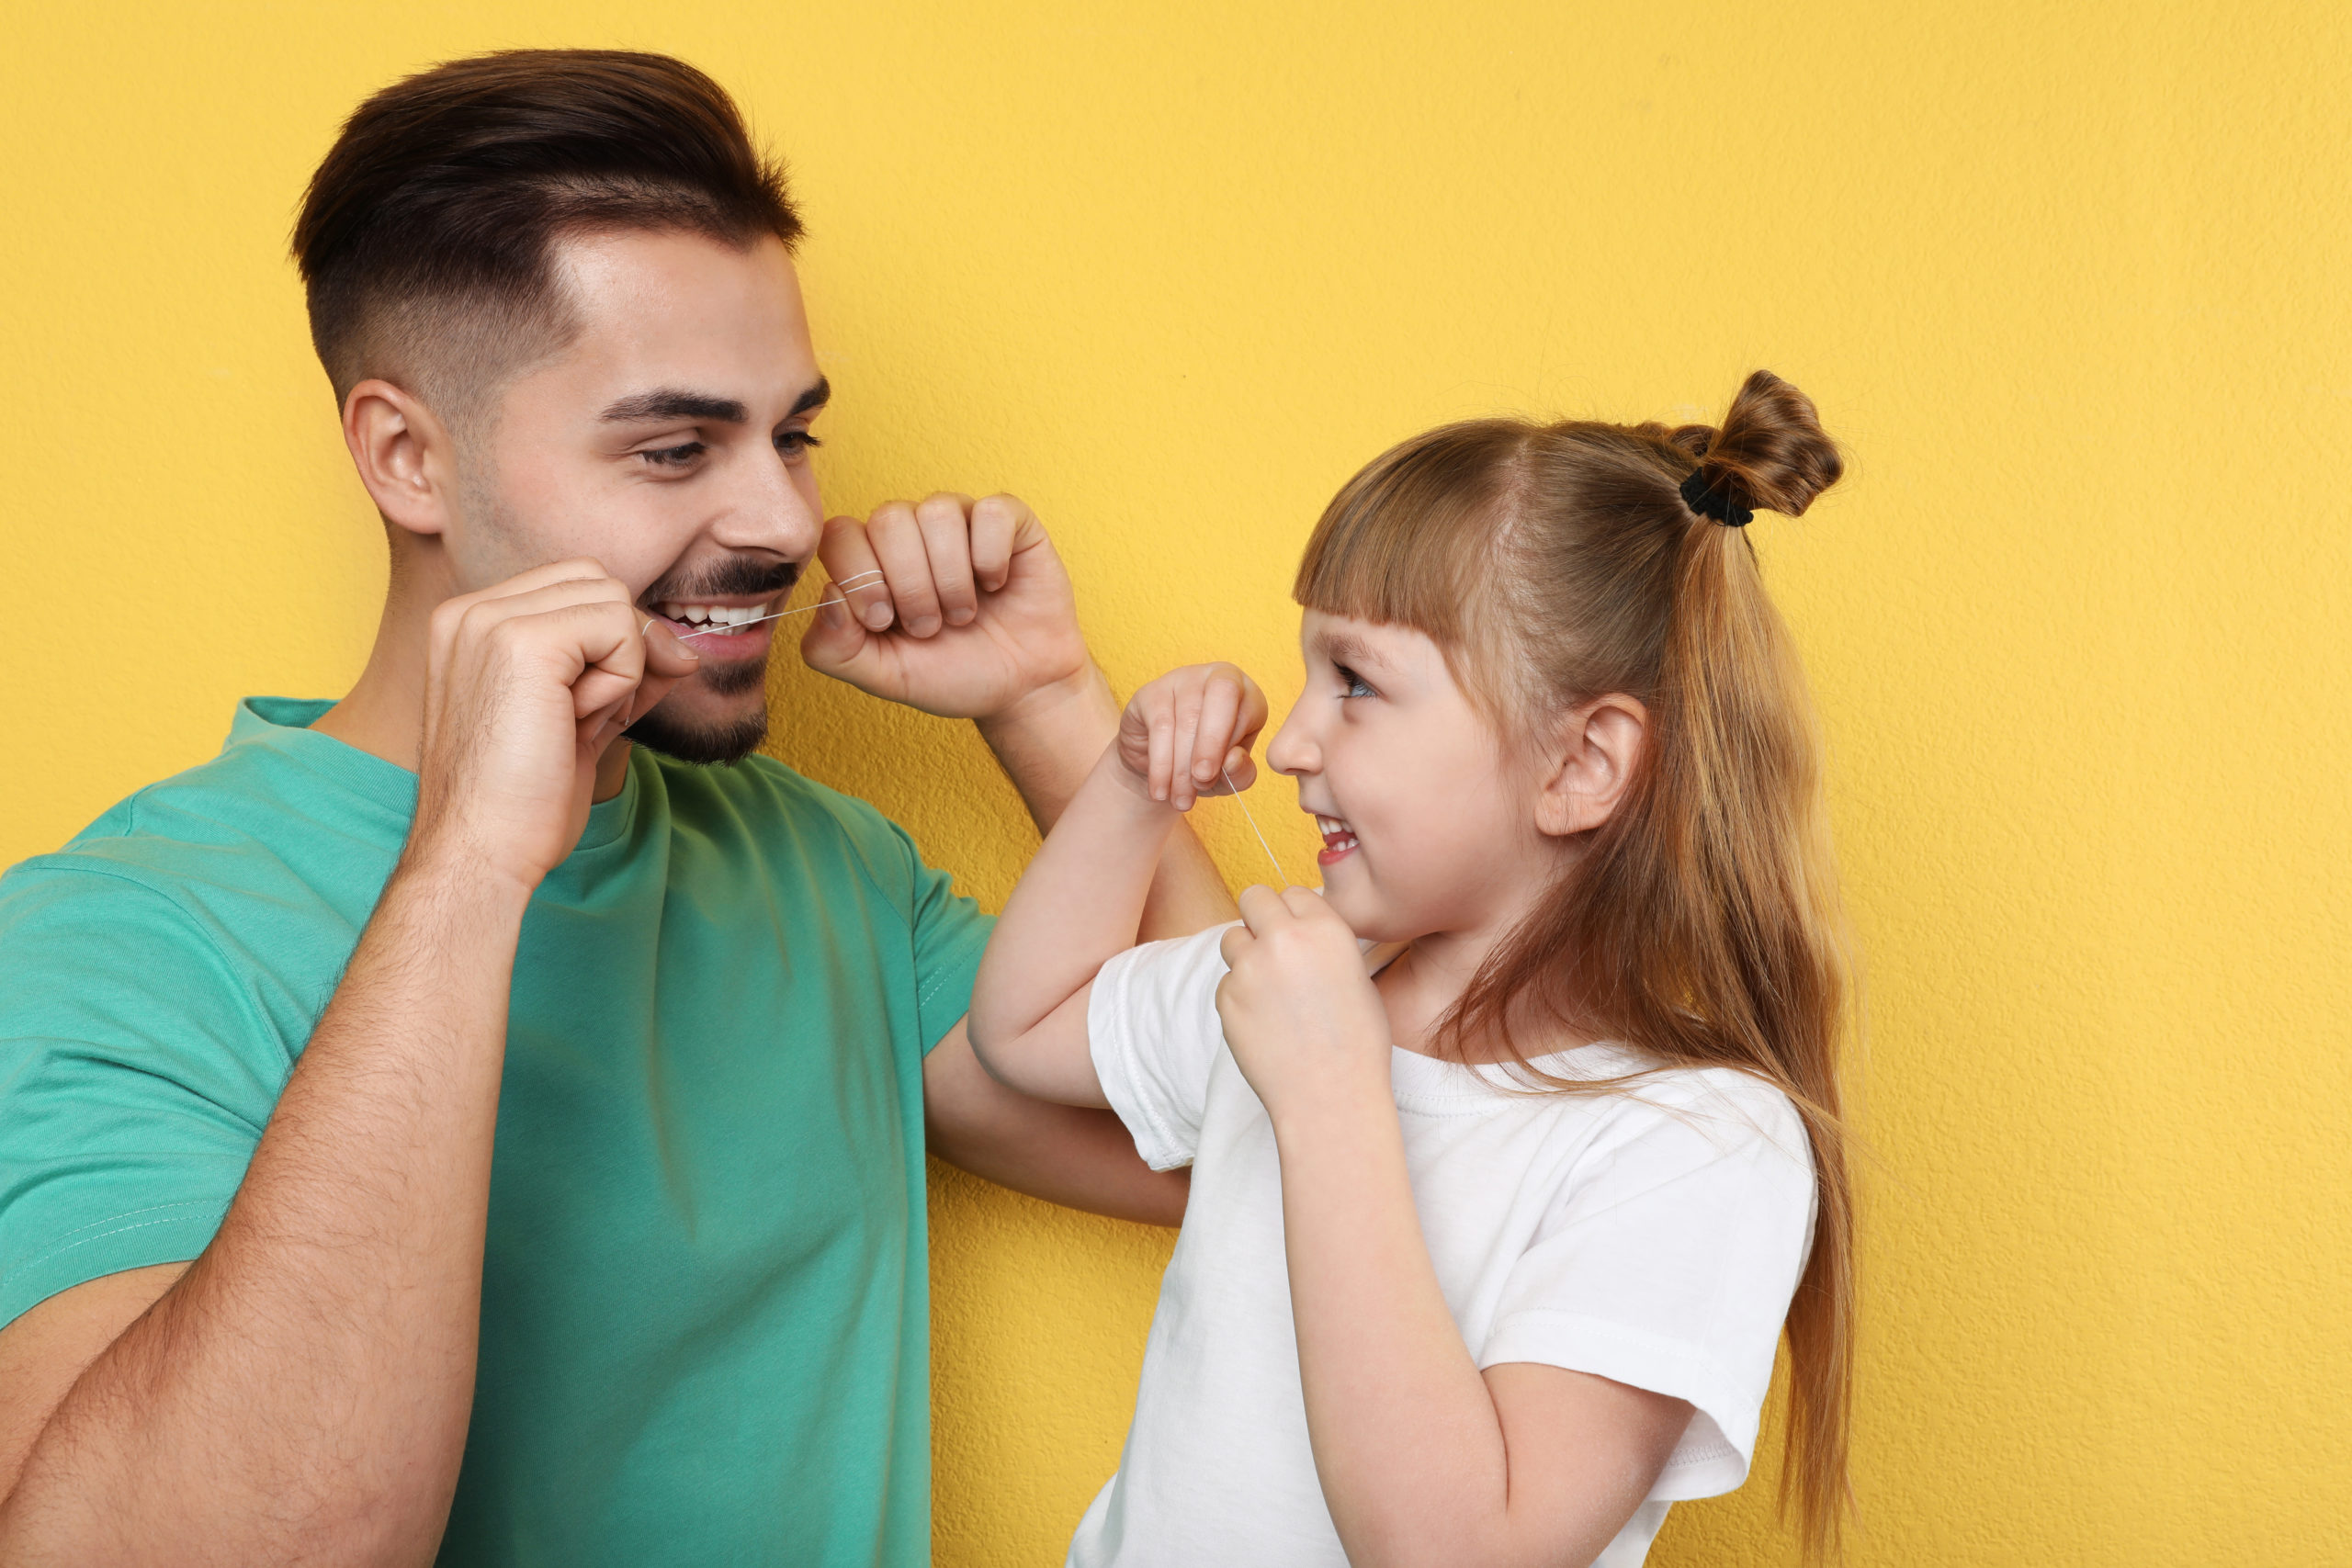 A little girl and her father flossing their teeth together while smiling